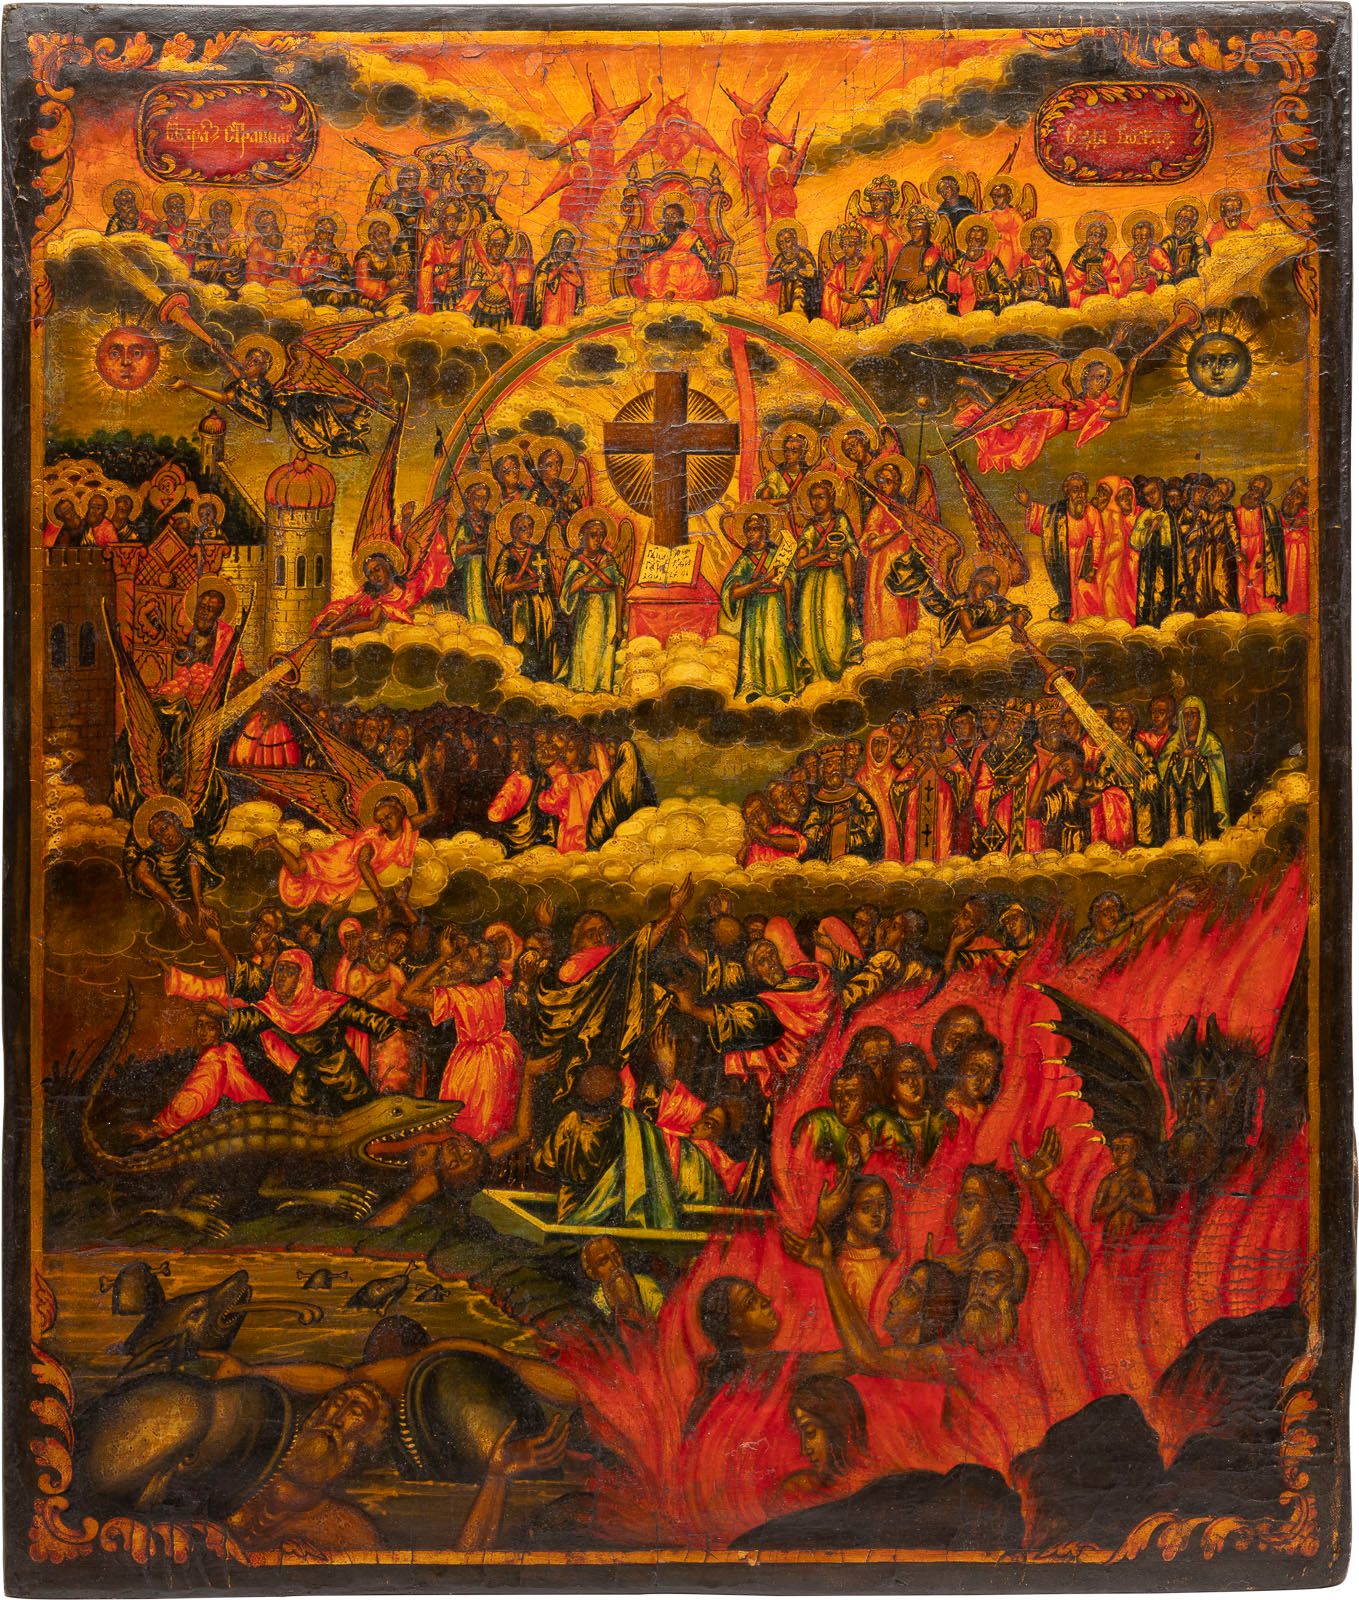 A LARGE ICON SHOWING THE LAST JUDGEMENT A LARGE ICON SHOWING THE LAST JUDGEMENT &hellip;